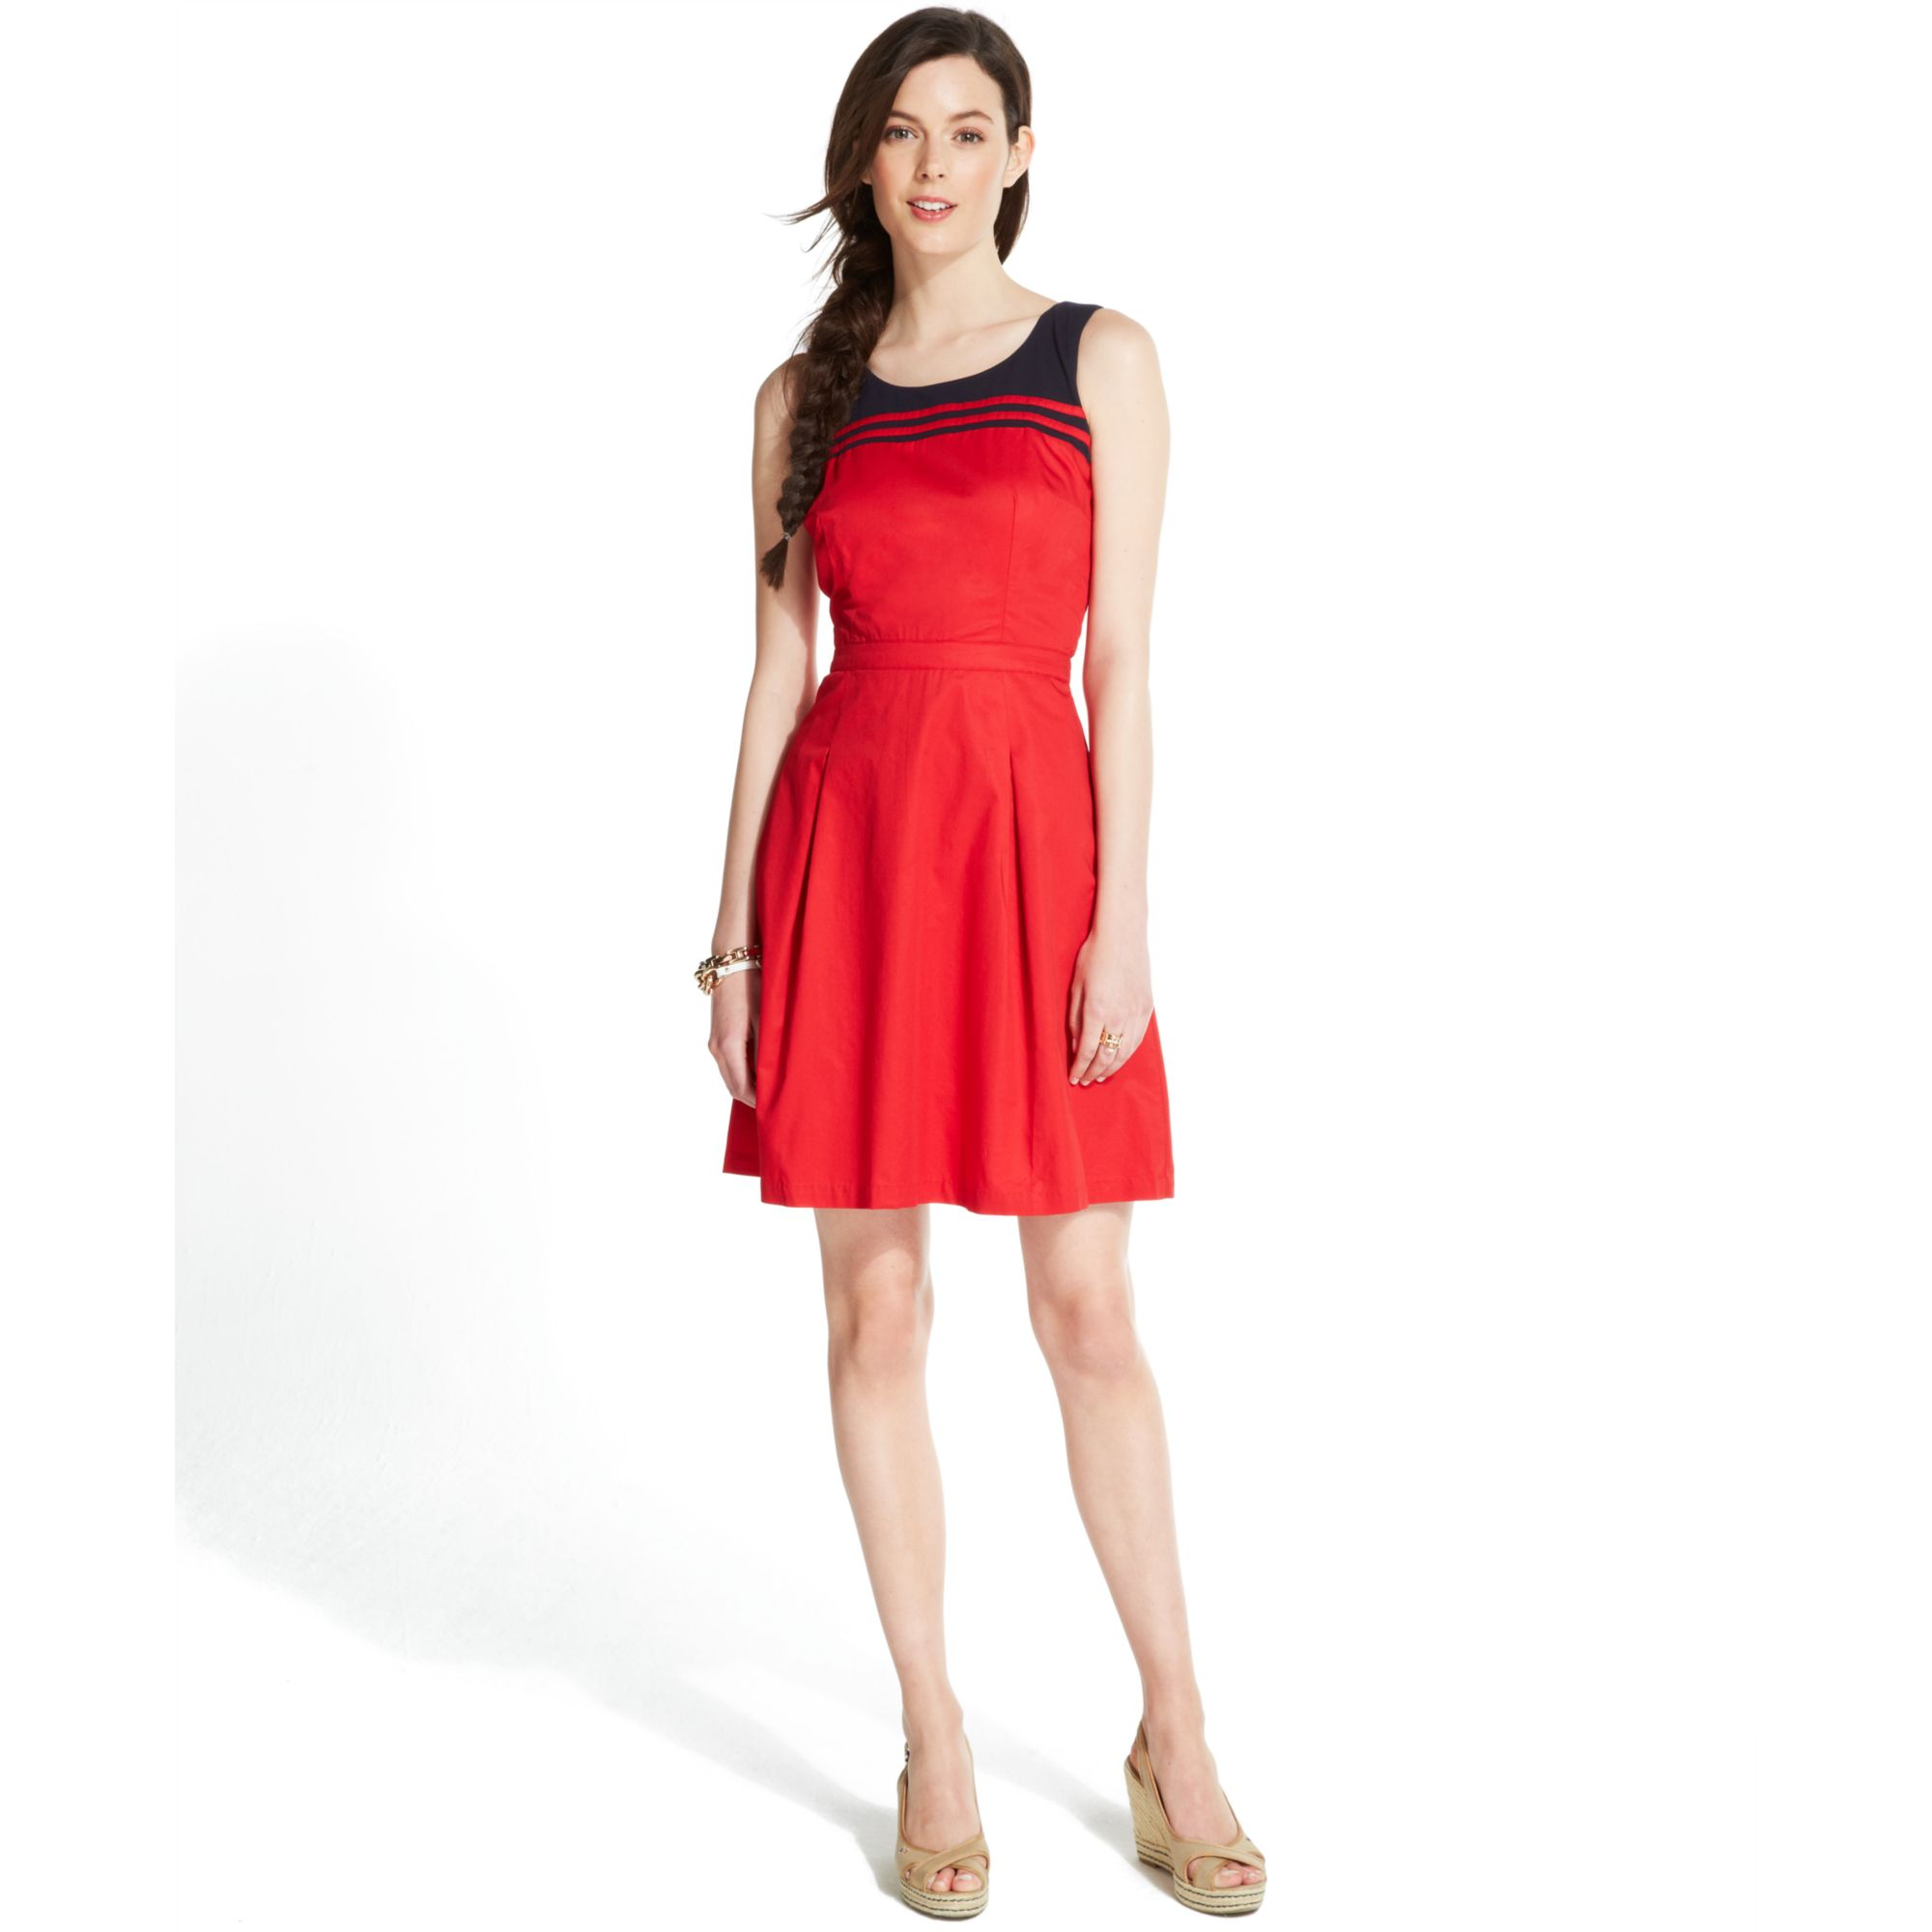 Tommy Hilfiger Sleeveless Colorblocked A-Line Dress in Red - Lyst